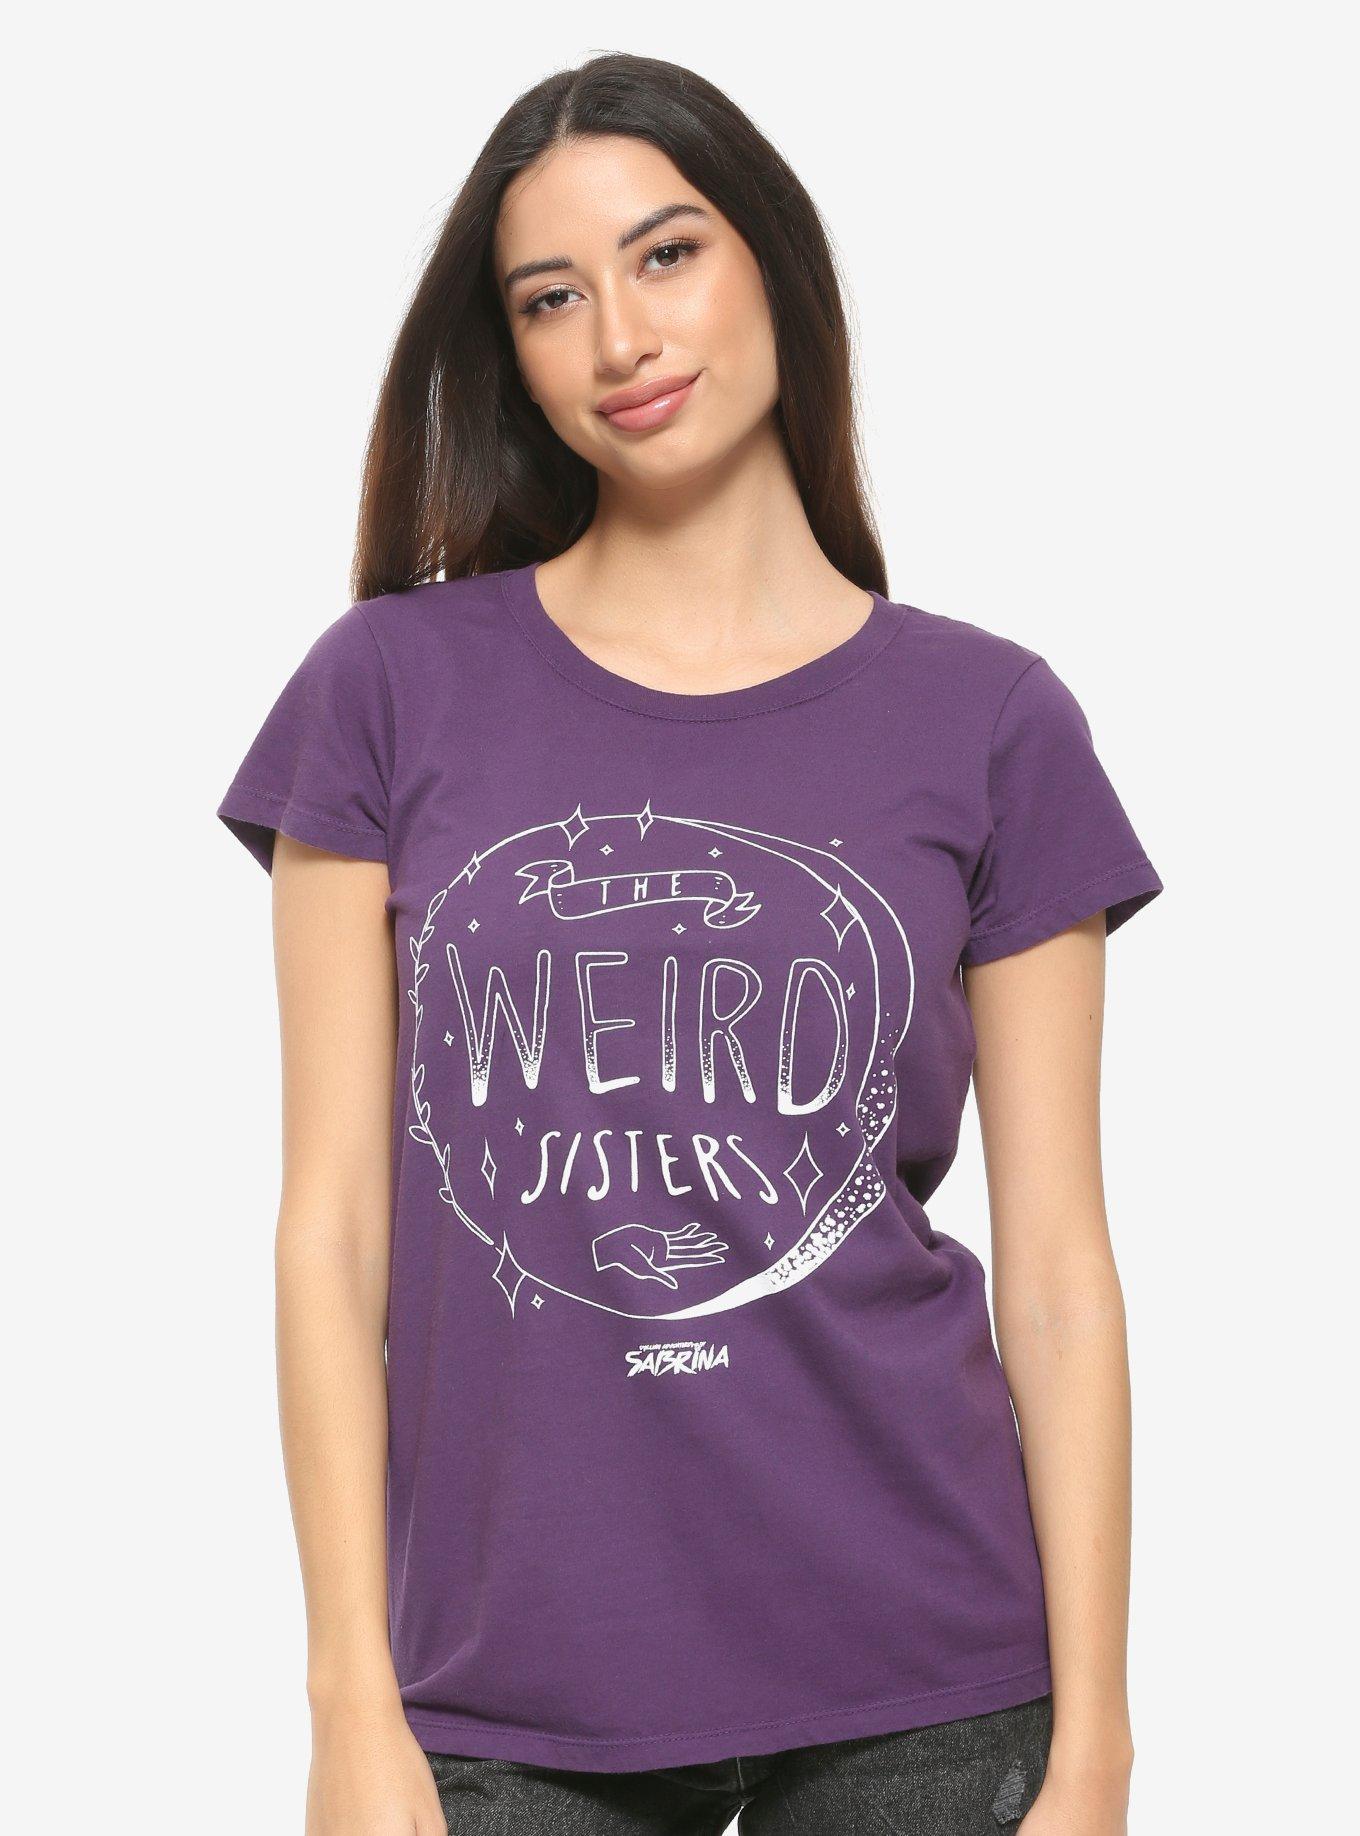 Chilling Adventures Of Sabrina The Weird Sisters Girls T-Shirt, MULTI, hi-res